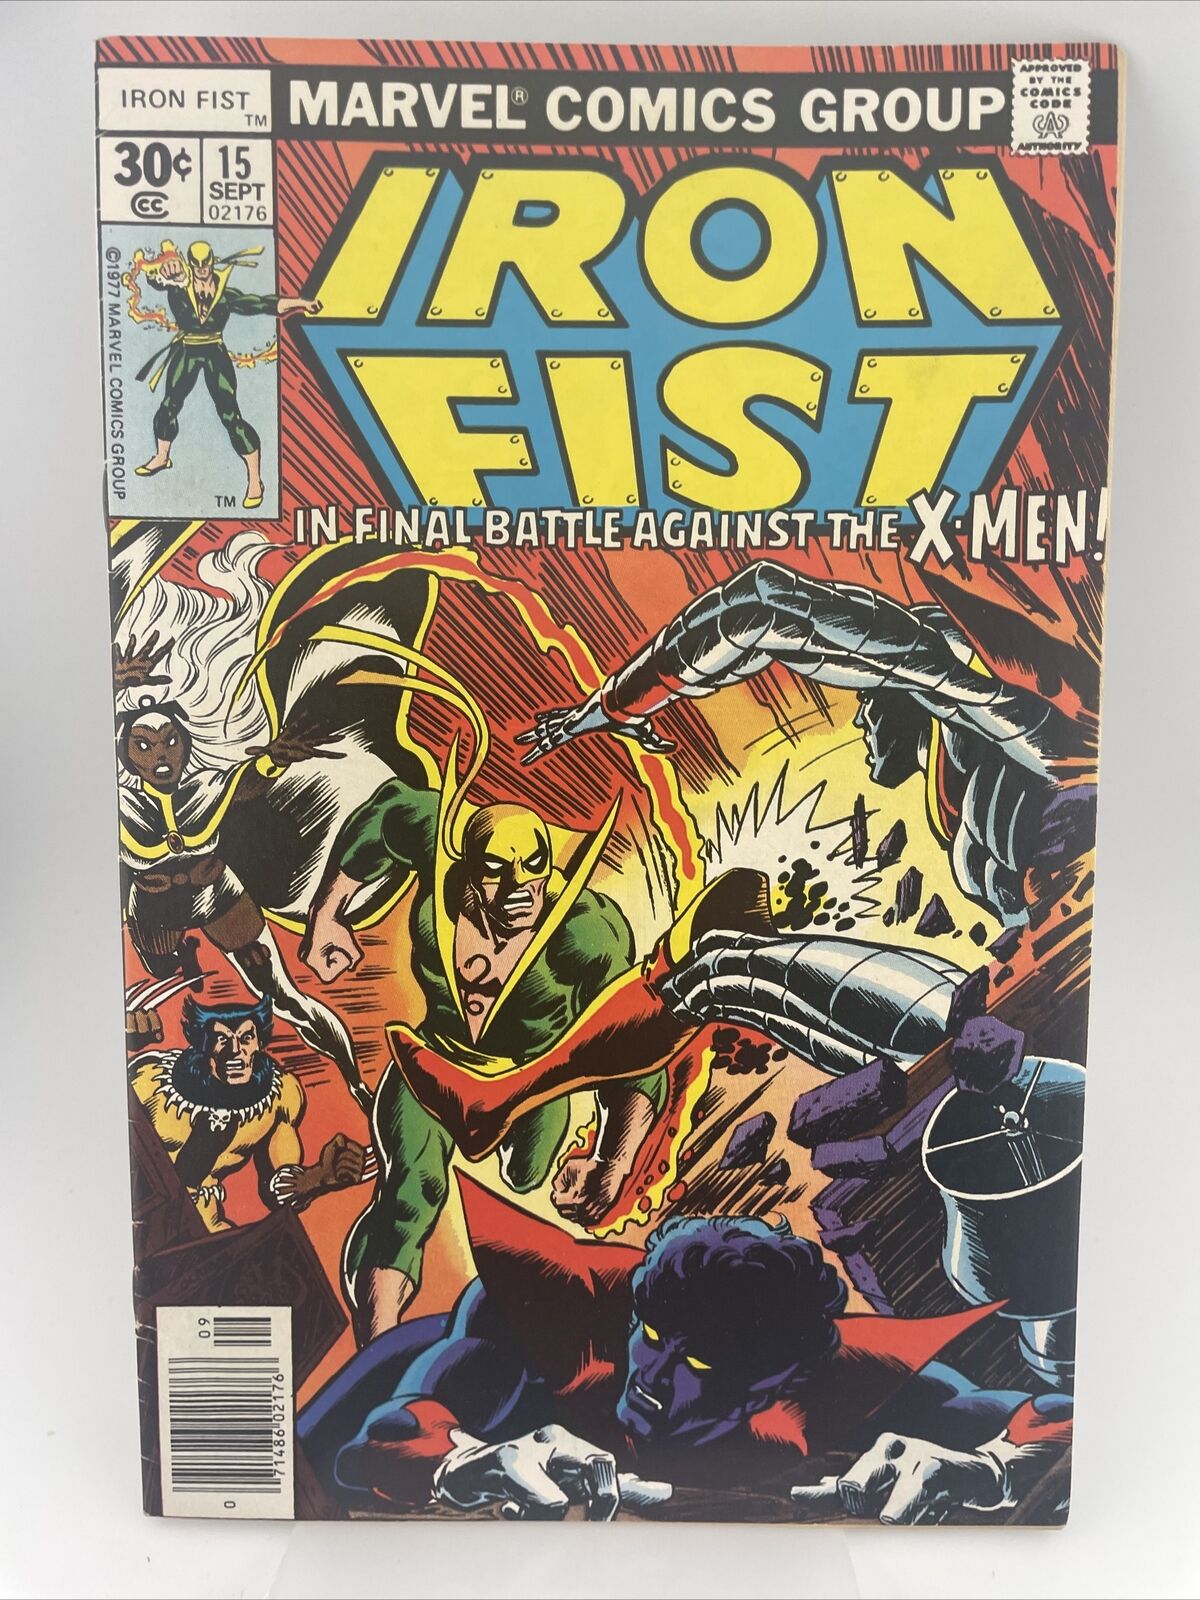 Iron Fist #15 (1977) 8.0 VF - Signed by Chris Claremont / Early John Byrne X-Men